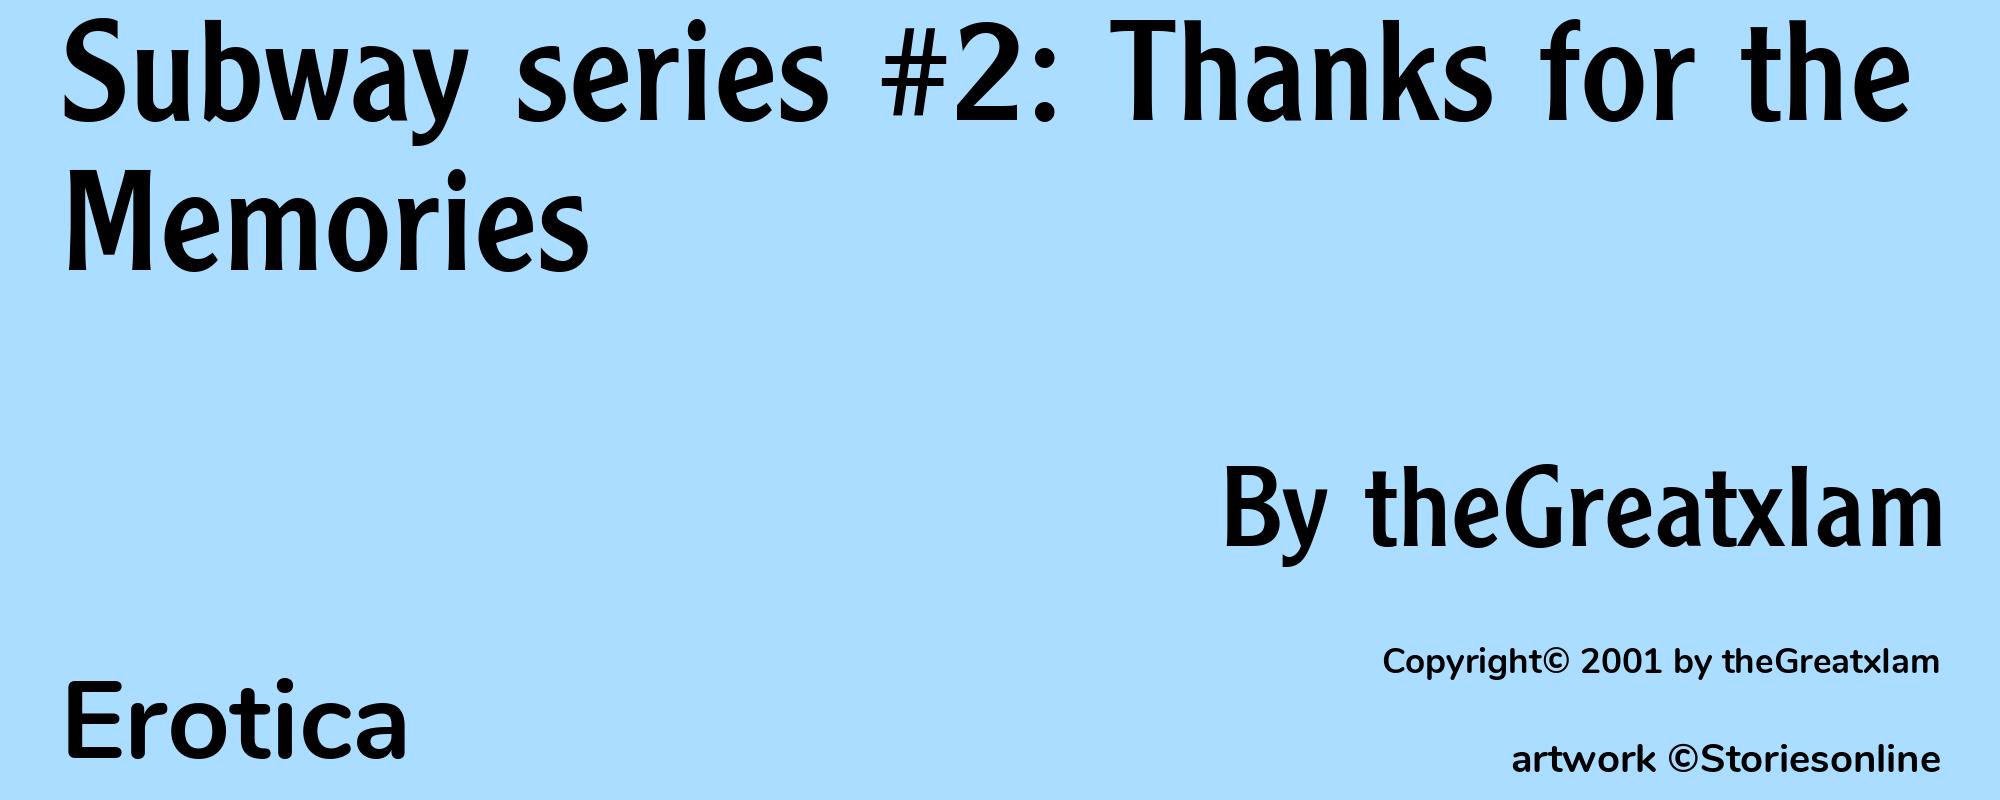 Subway series #2: Thanks for the Memories - Cover